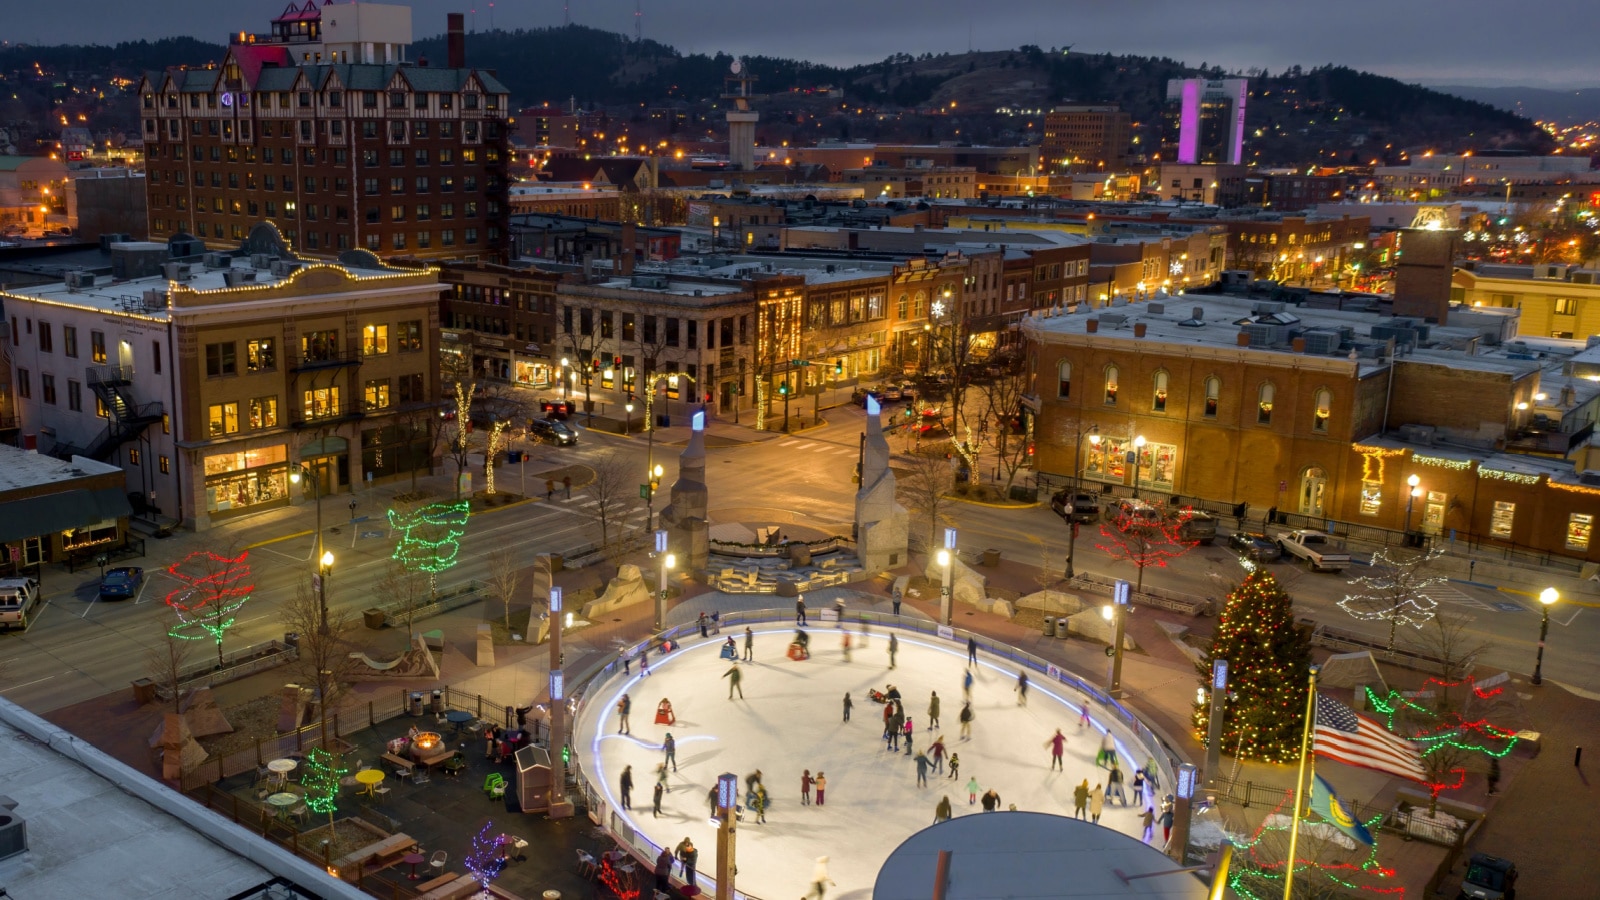 Aerial View of Christmas Lights in Rapid City, South Dakota at Dusk